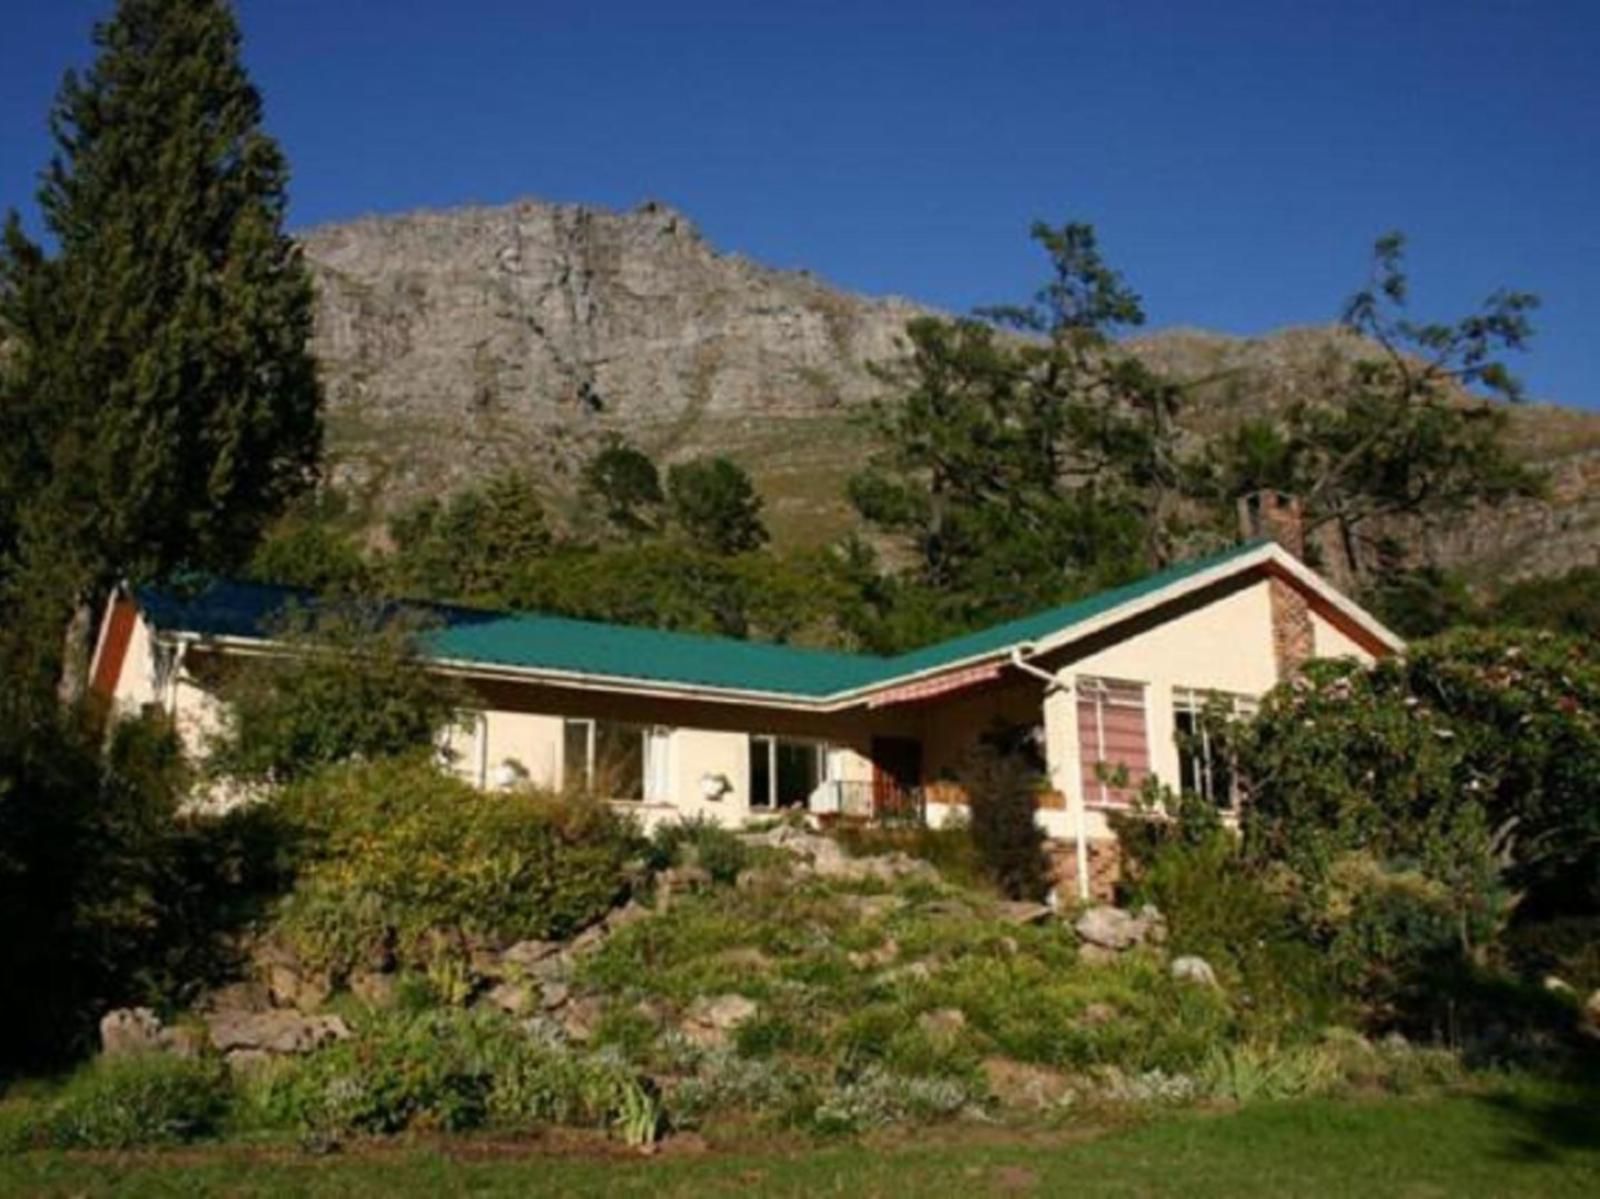 Kierie Kwaak Self Catering Cottages Stellenbosch Western Cape South Africa Complementary Colors, House, Building, Architecture